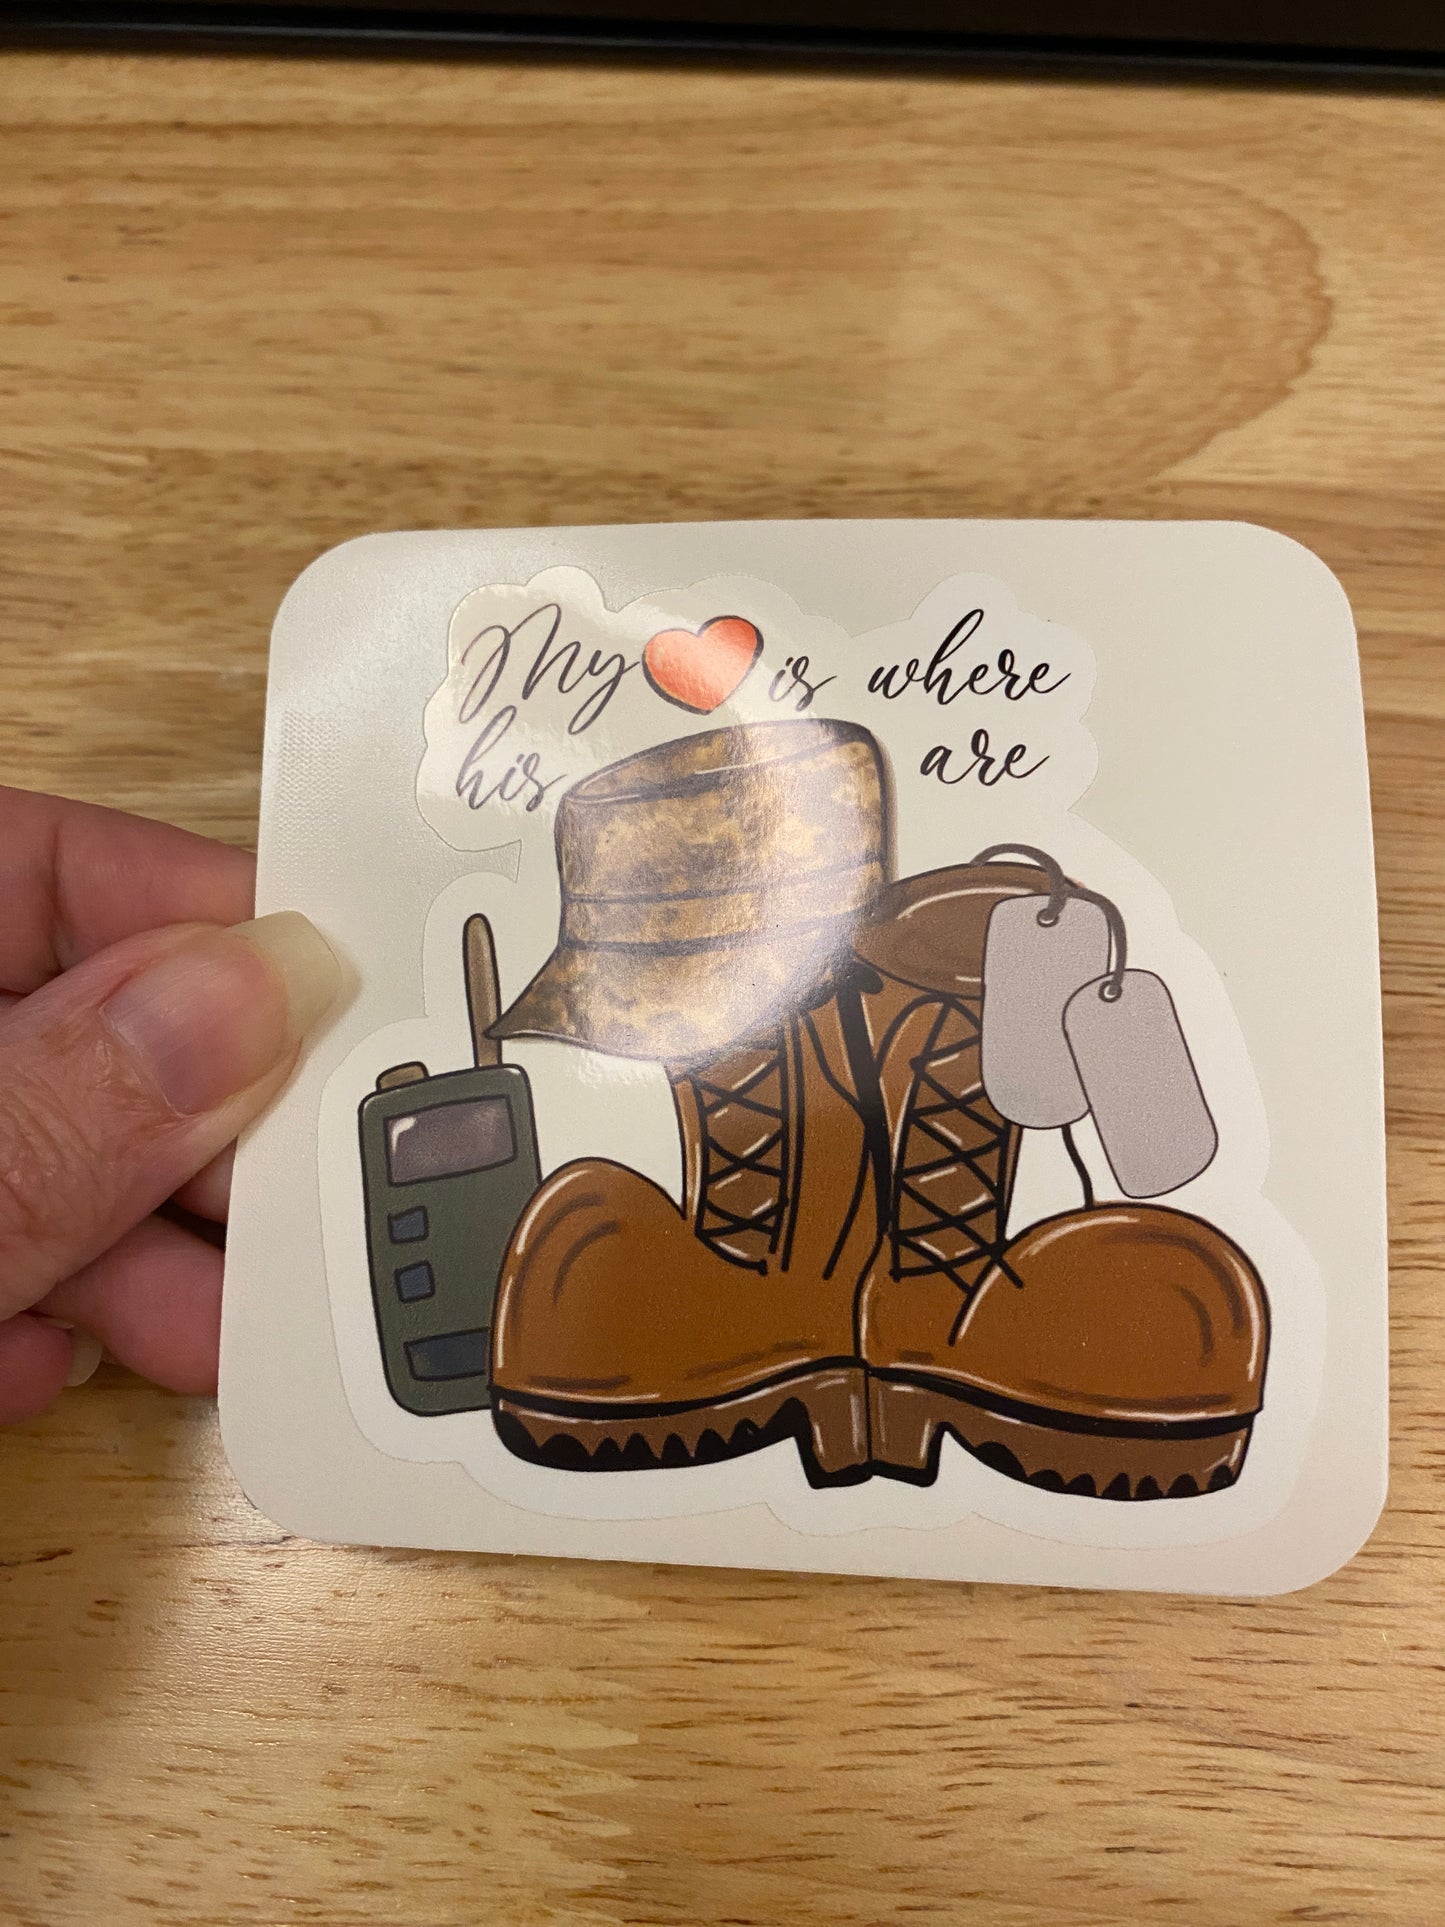 My Heart is where his boots are STICKER